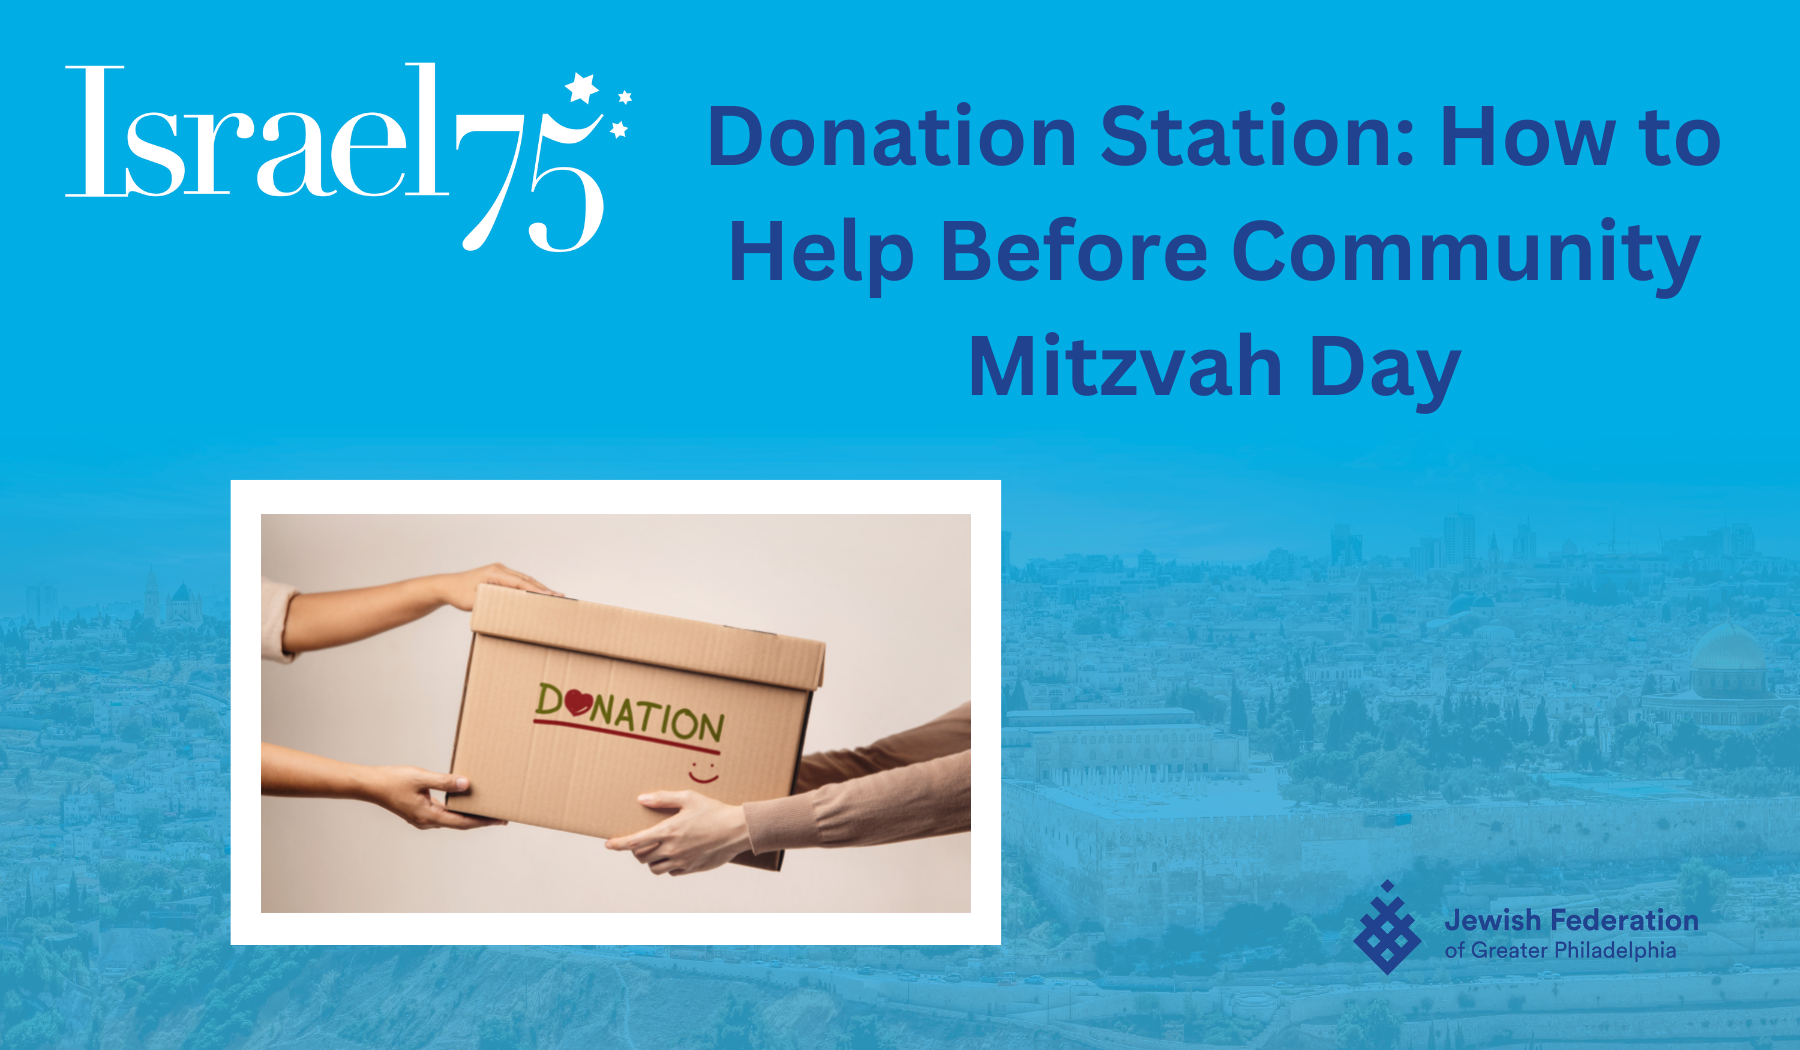 Donation Station: How to Help Before Community Mitzvah Day